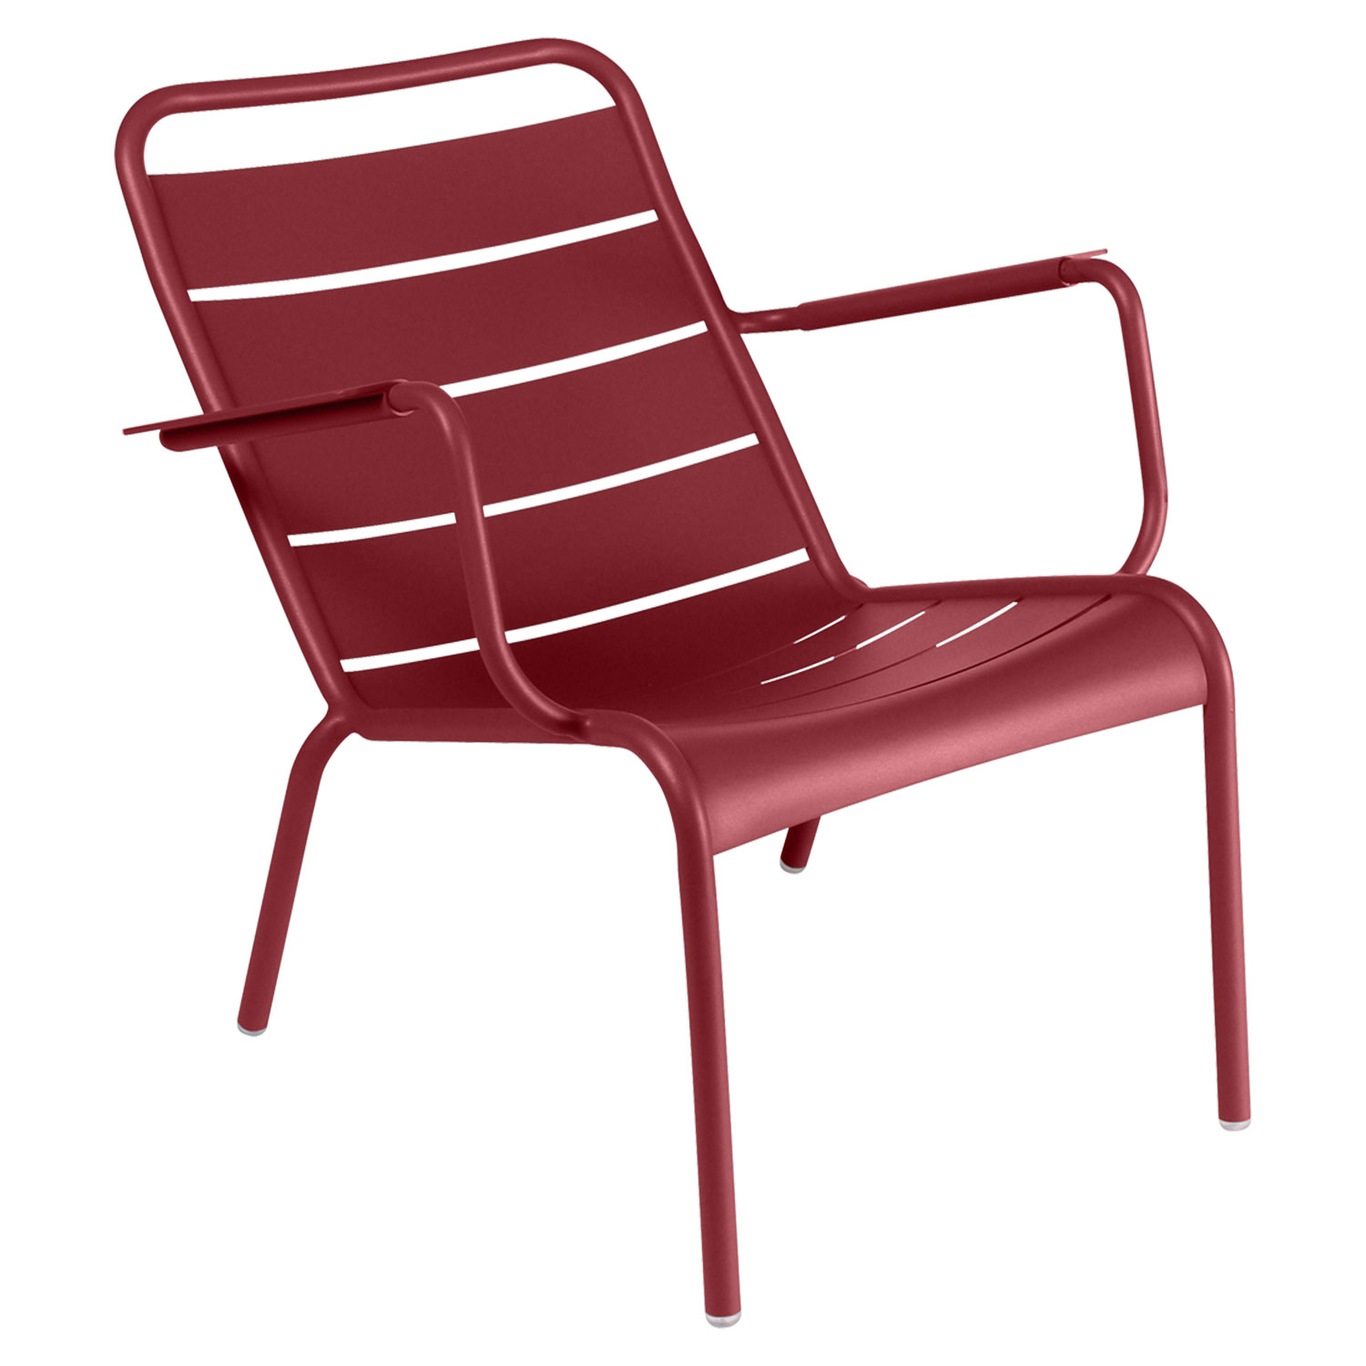 Luxembourg Armchair Low, Chili